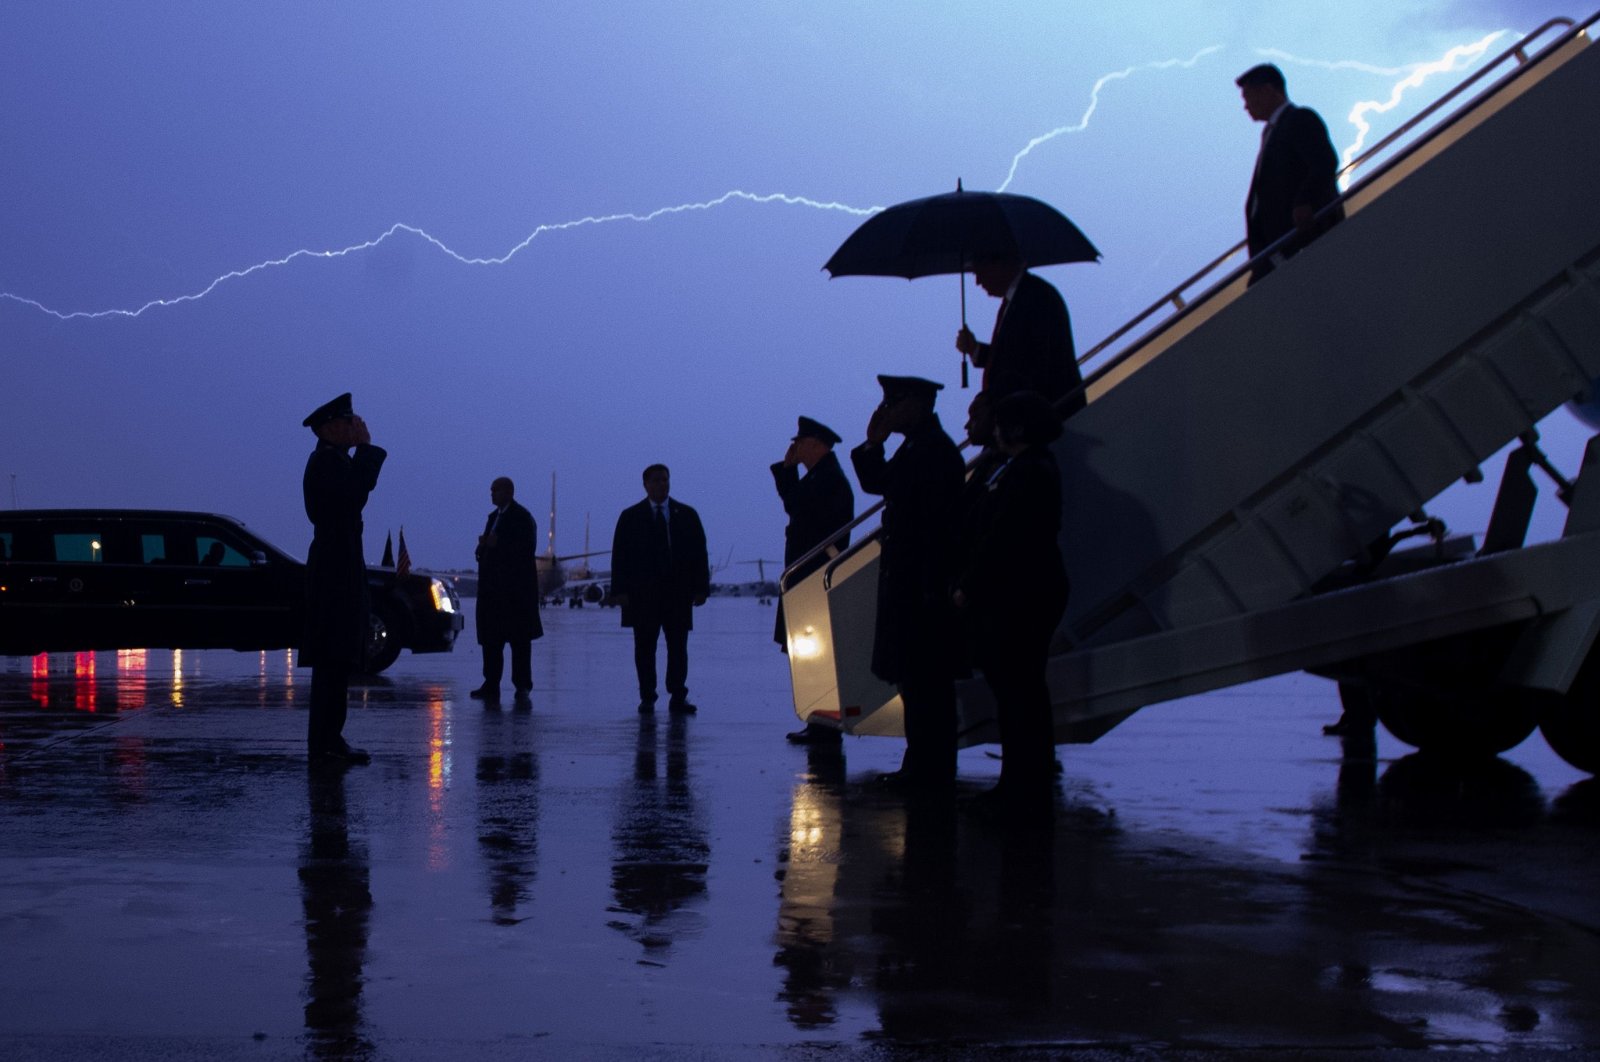 U.S. President Donald Trump disembarks from Air Force One as lightning splits the sky during a storm, Maryland, U.S., Aug. 28, 2020. (AFP Photo)